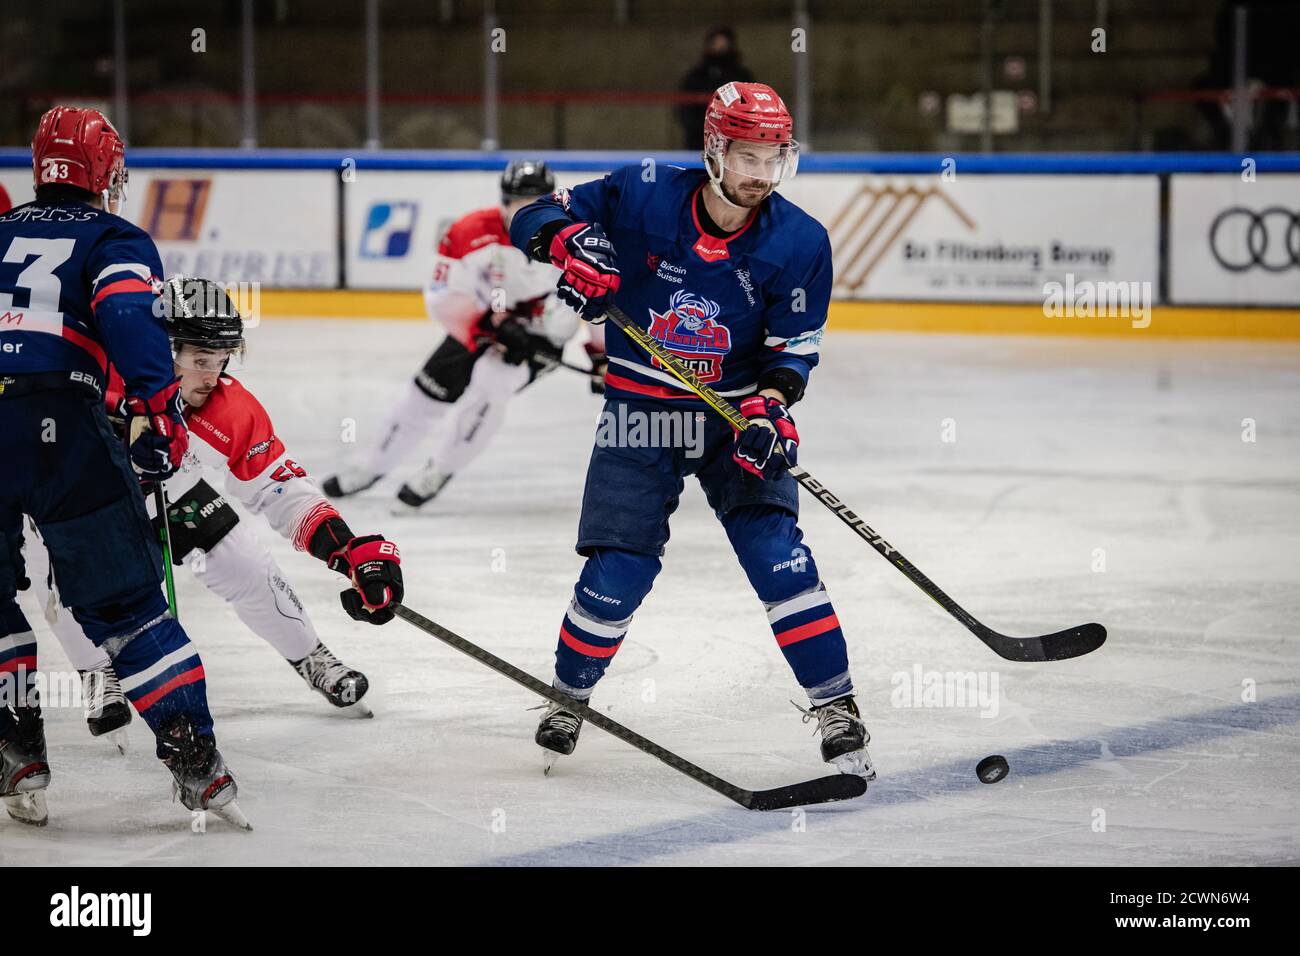 Horsholm, Denmark. 29th Sep, 2020. Mattias Persson (90) of Rungsted Seier  Capital seen in the Metalligaen ice hockey match between Rungsted Seier  Capital and Aalborg Pirates at Bitcoin Arena in Horsmolm. (Photo